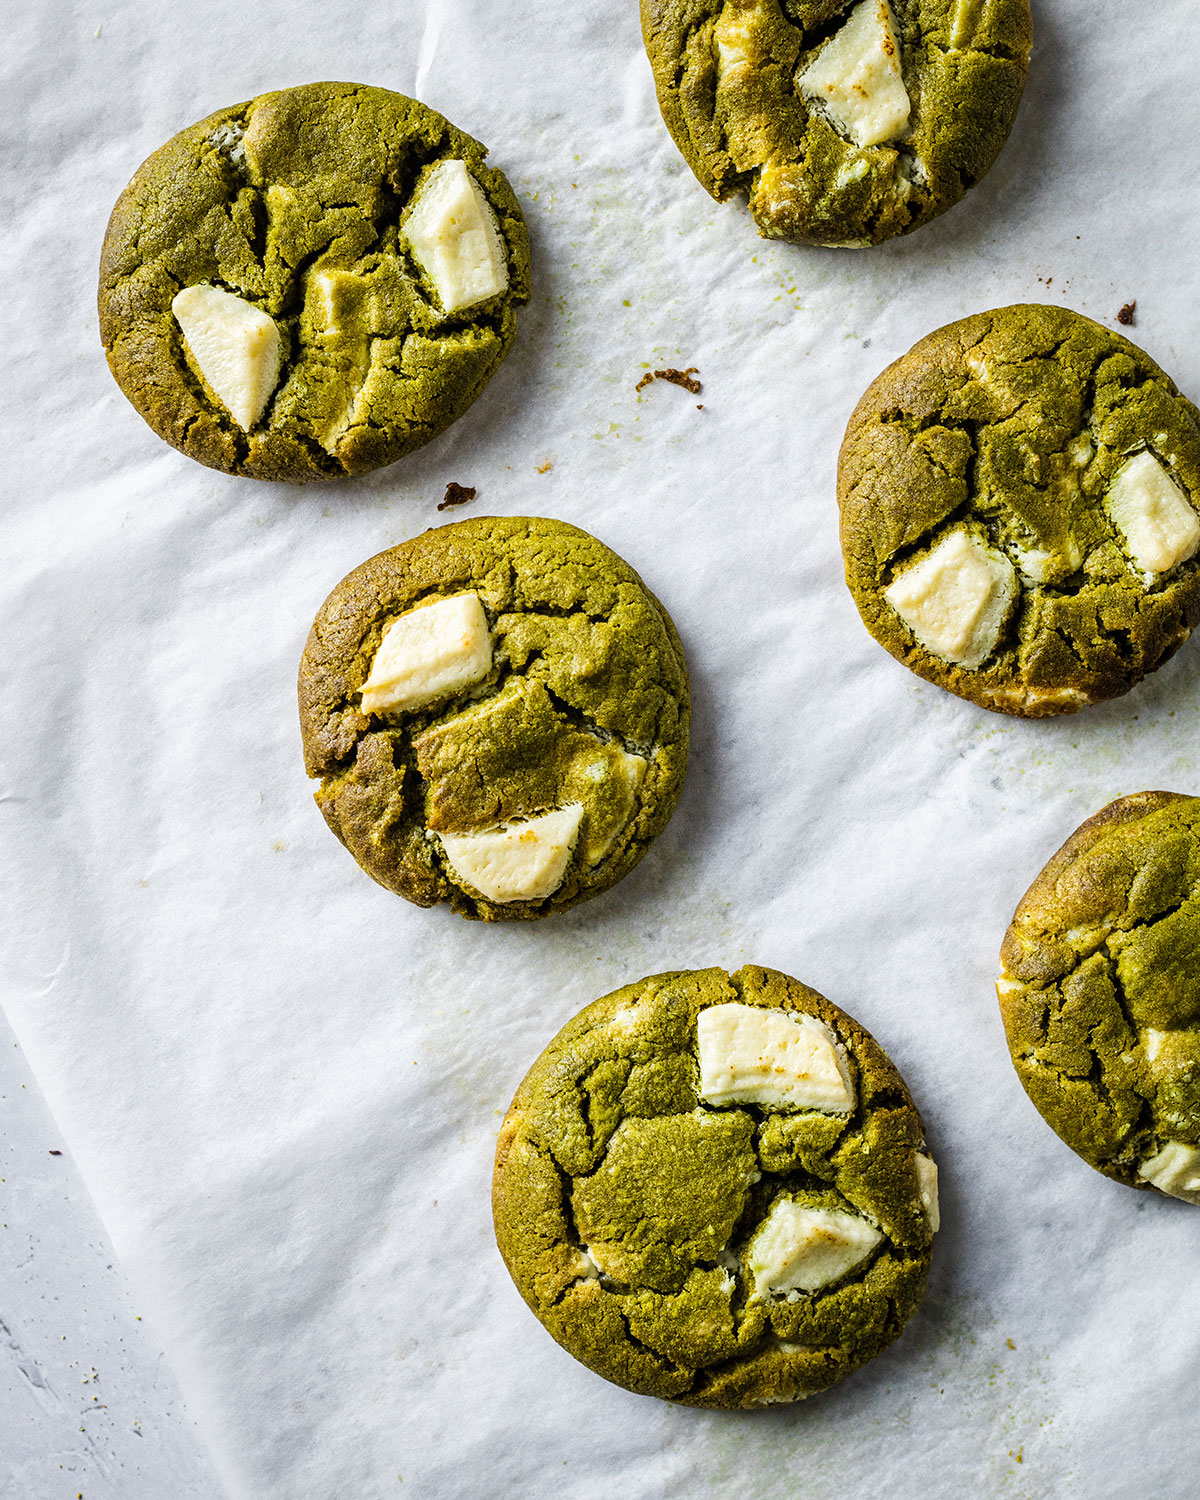 Baked matcha white chocolate cookies straight out of the oven on a baking sheet